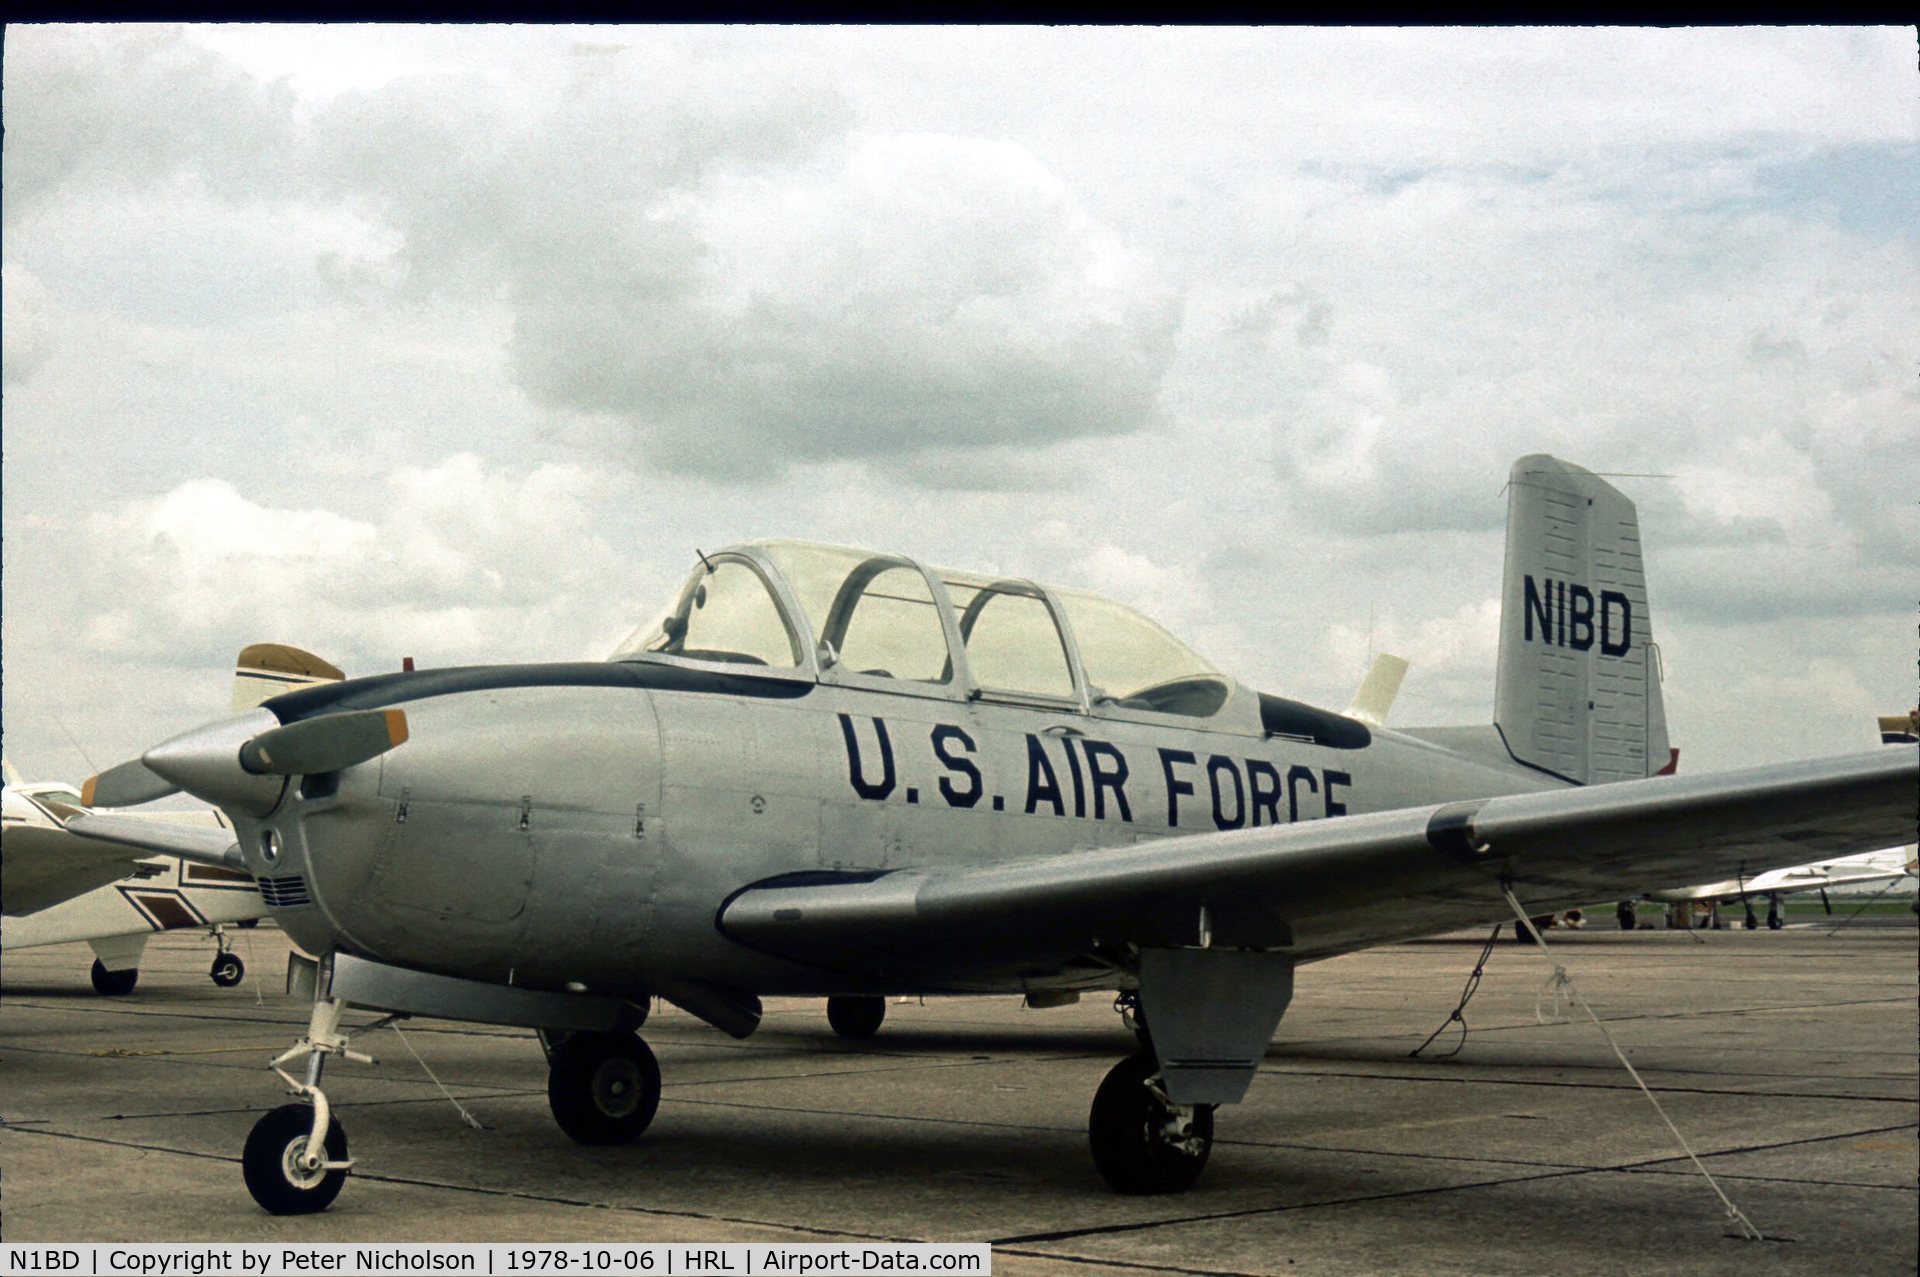 N1BD, 1954 Beech T-34A (A45) Mentor Mentor C/N G-91, Visiting CAF Airshow at Harlingen in 1978